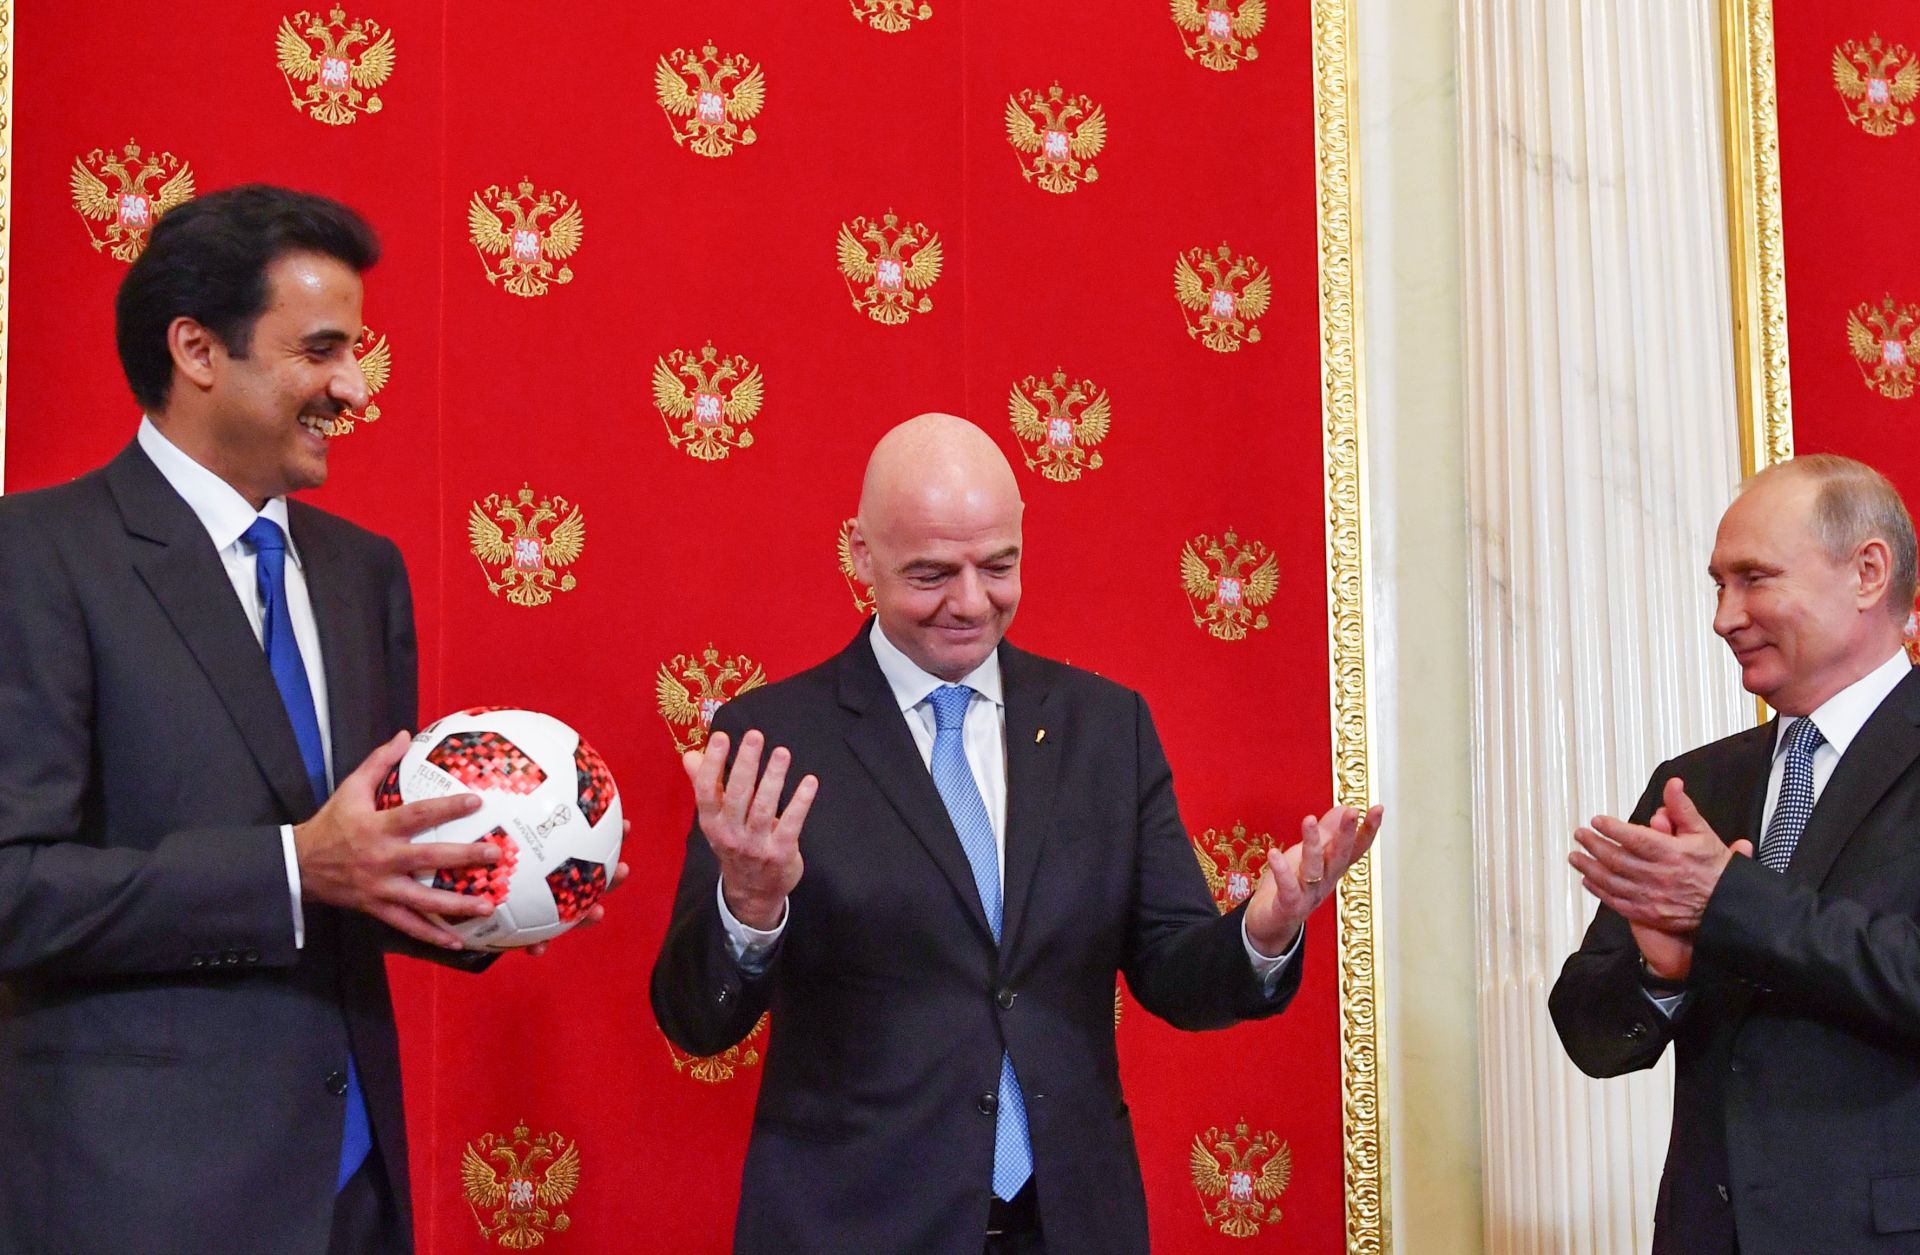 Qatari Emir Sheikh Tamim bin Hamad al-Thani (L) smiles at FIFA President Gianni Infantino (C) and Russian President Vladimir Putin at the end of the 2018 World Cup in Russia. As part of the closing ceremony, Putin passed a soccer ball to al-Thani, whose country will hold the next tournament in 2022, in a symbolic gesture.